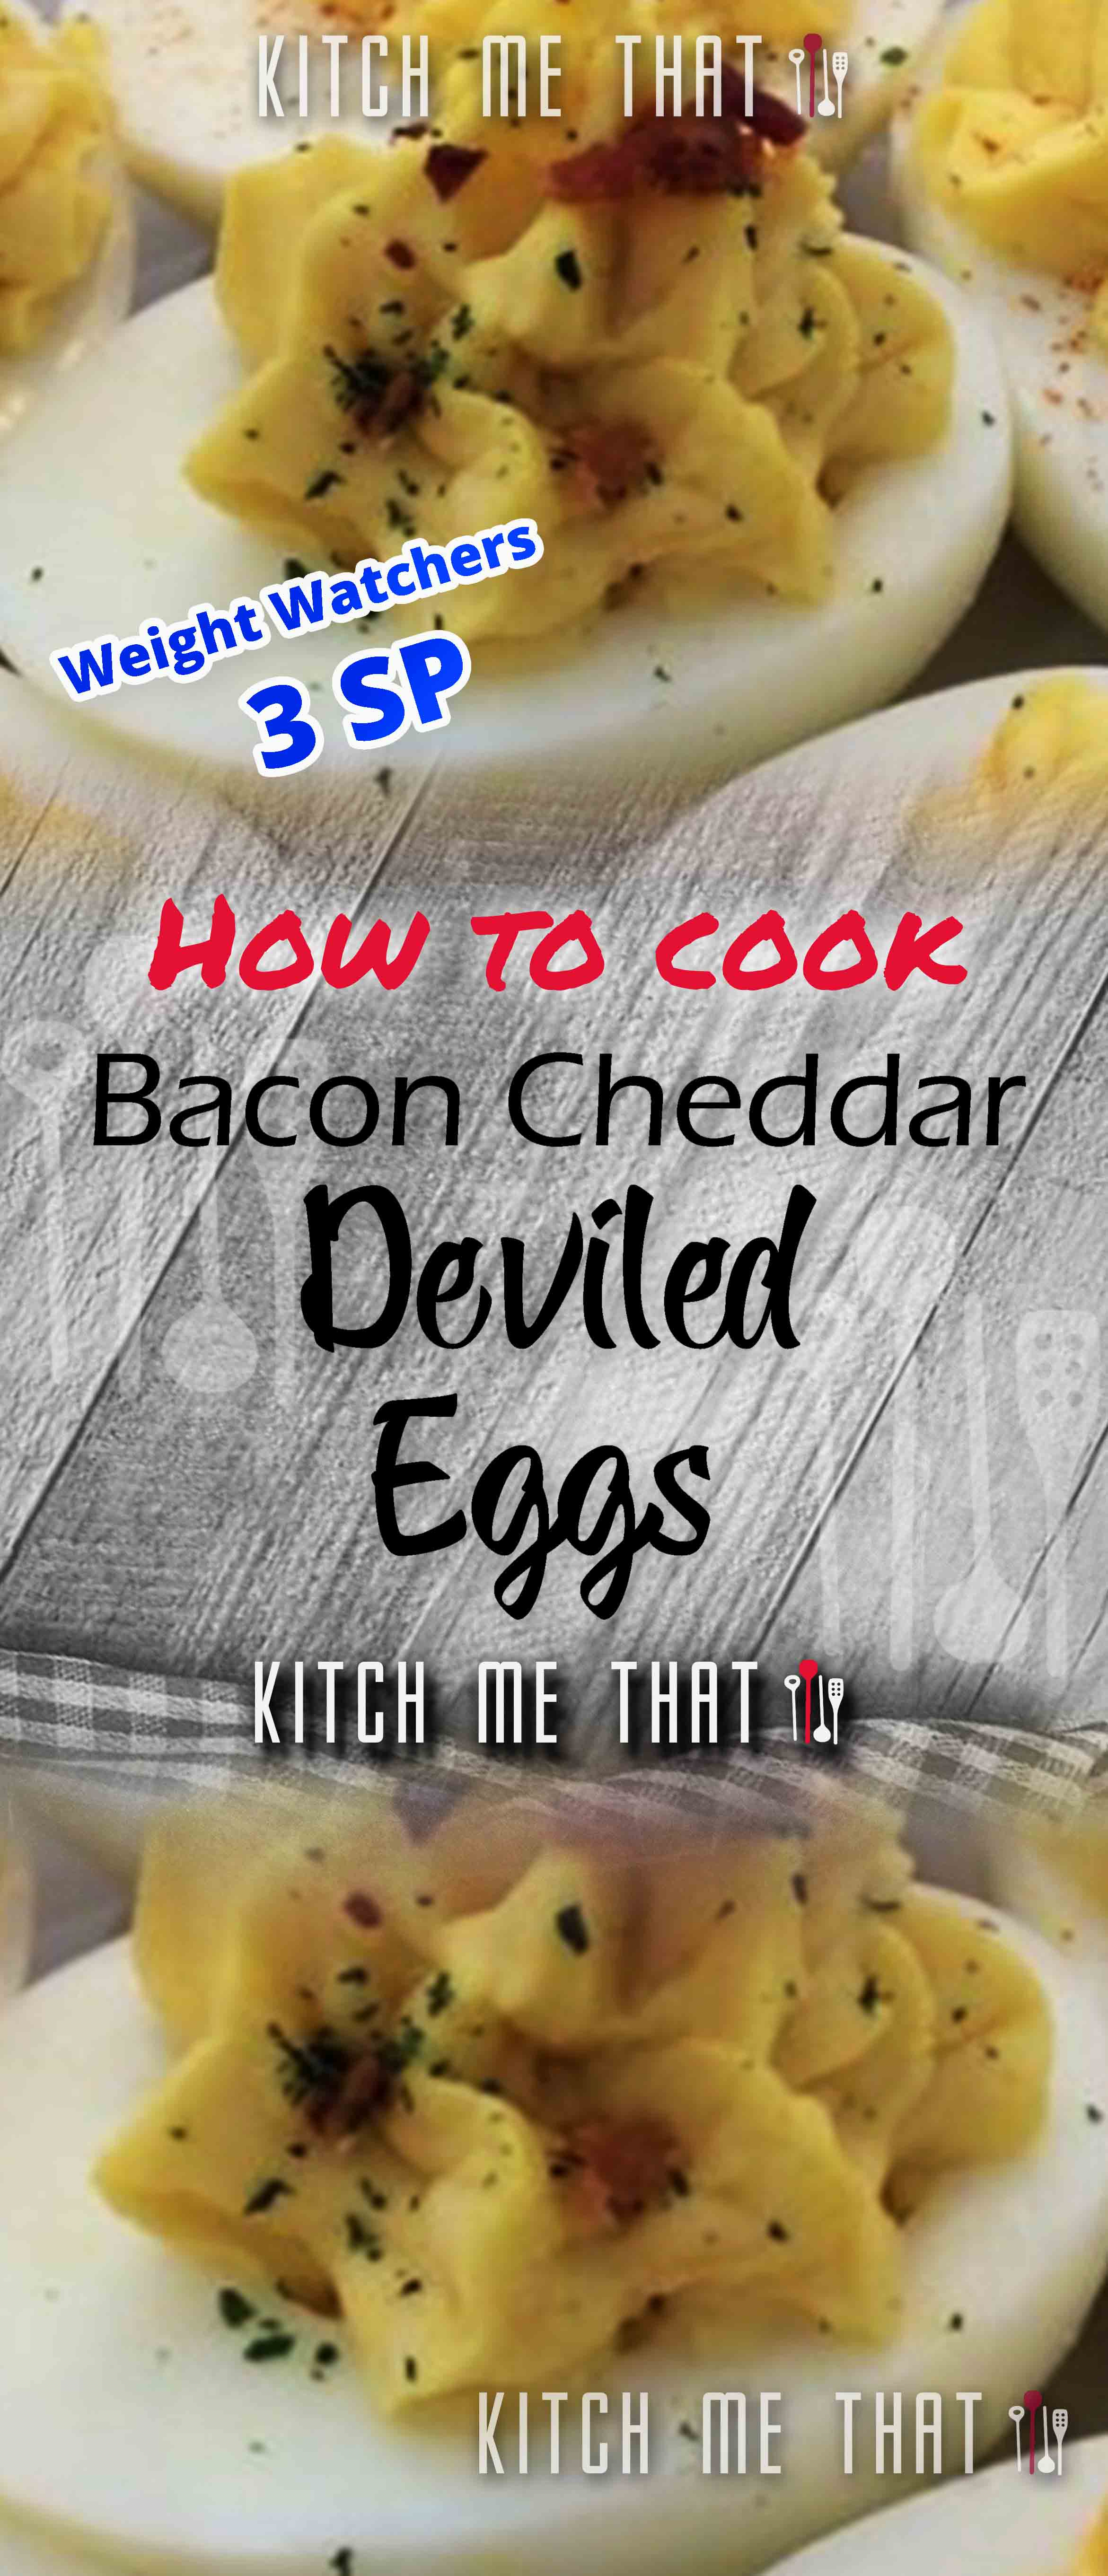 Exclusive Bacon Cheddar Deviled Eggs NEW 2021